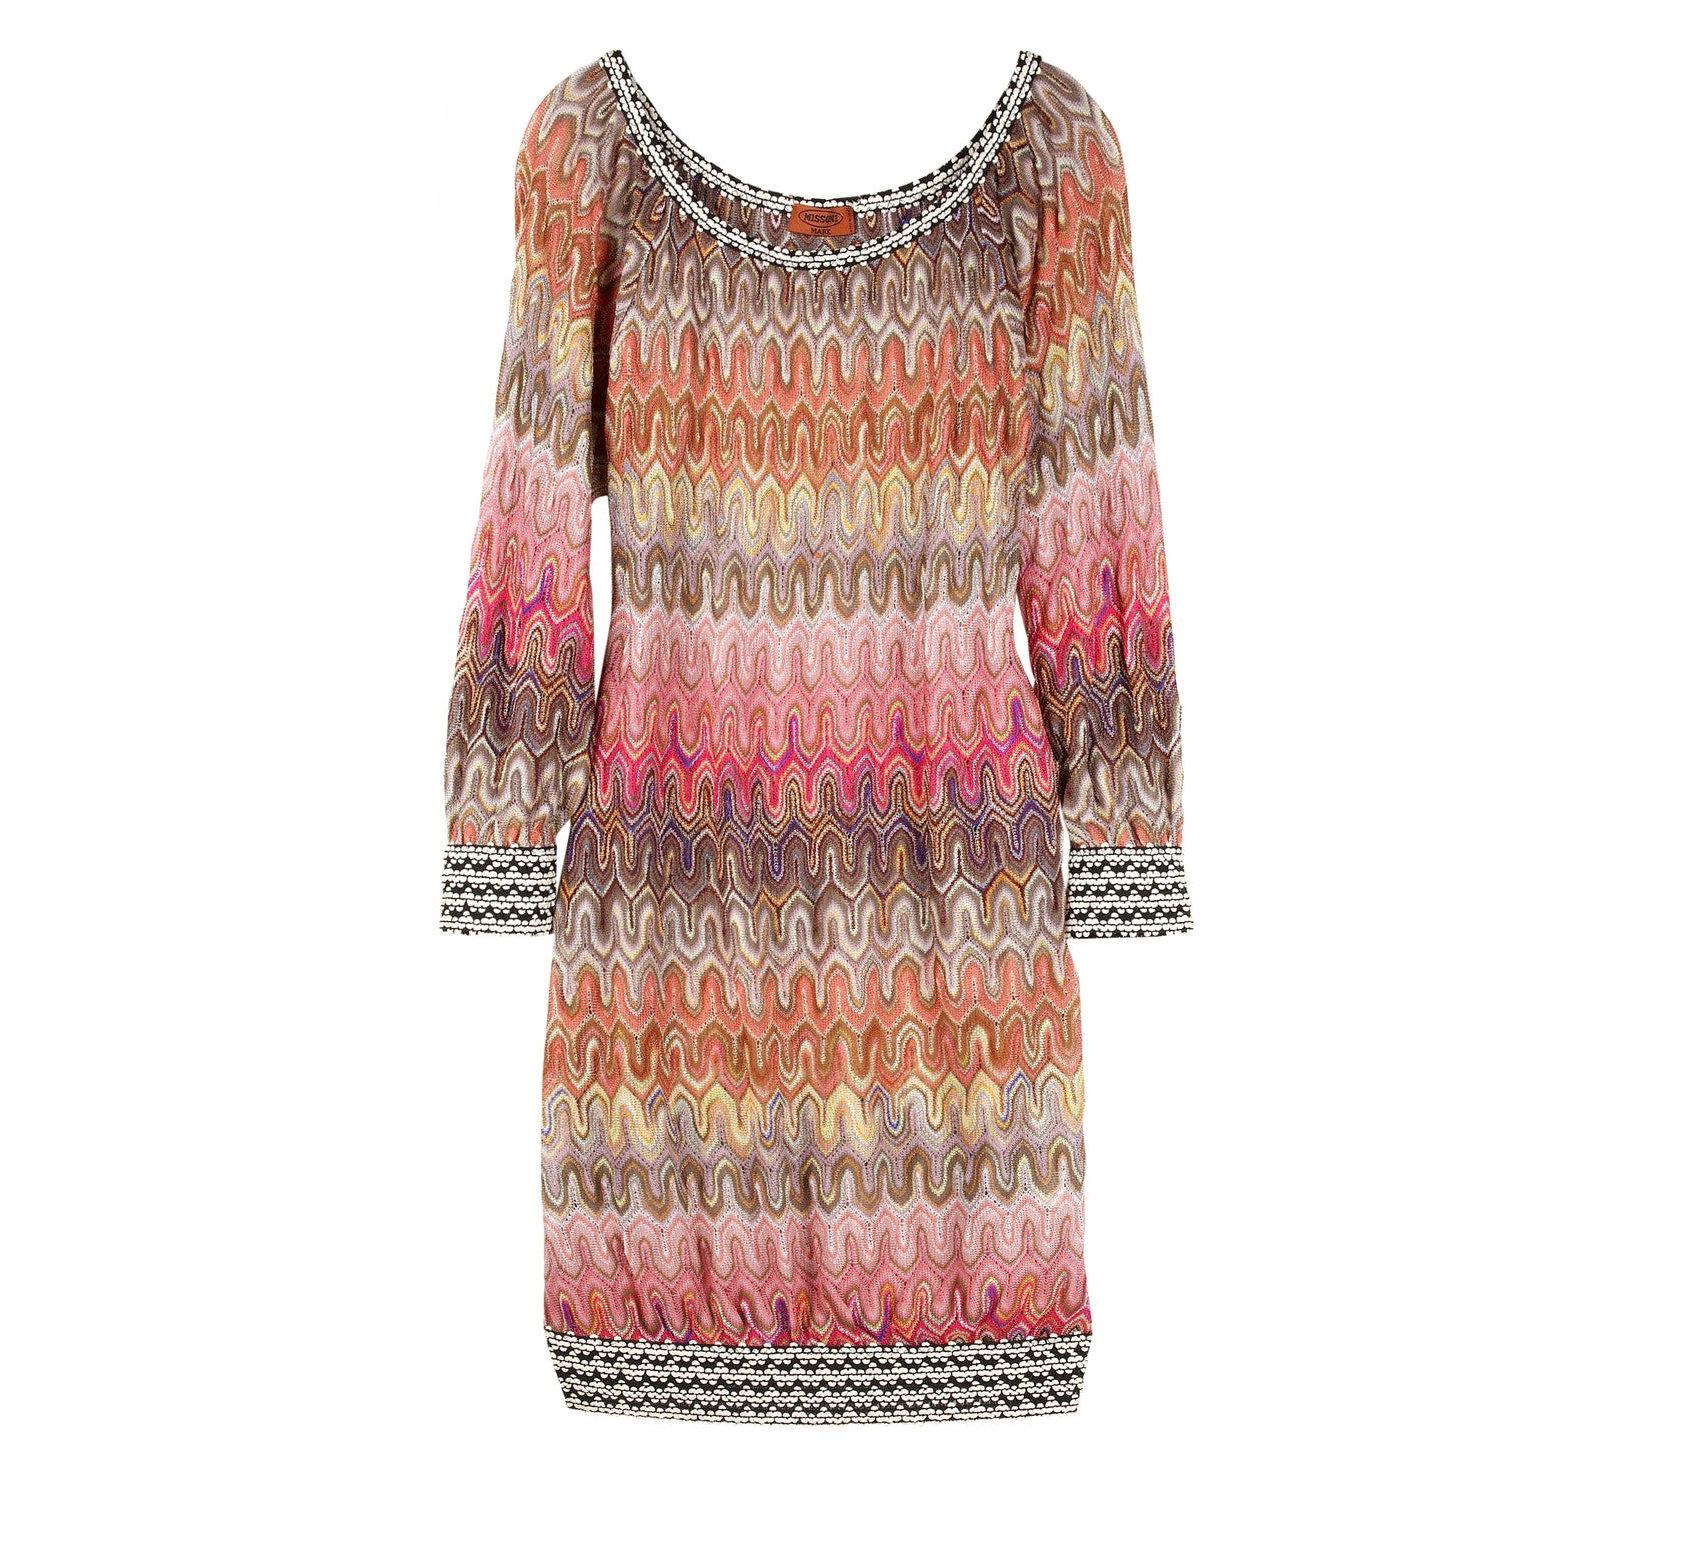 Missoni Main Label 
Beautiful pink shades
Classic MISSONI signature zigzag knit
Simply slips on
Bateau neck
Batwing / Dolman half-length sleeves
Contrast trim
Elasticated neck and hem
Due to the elasticated hem, the dress can be worn in various